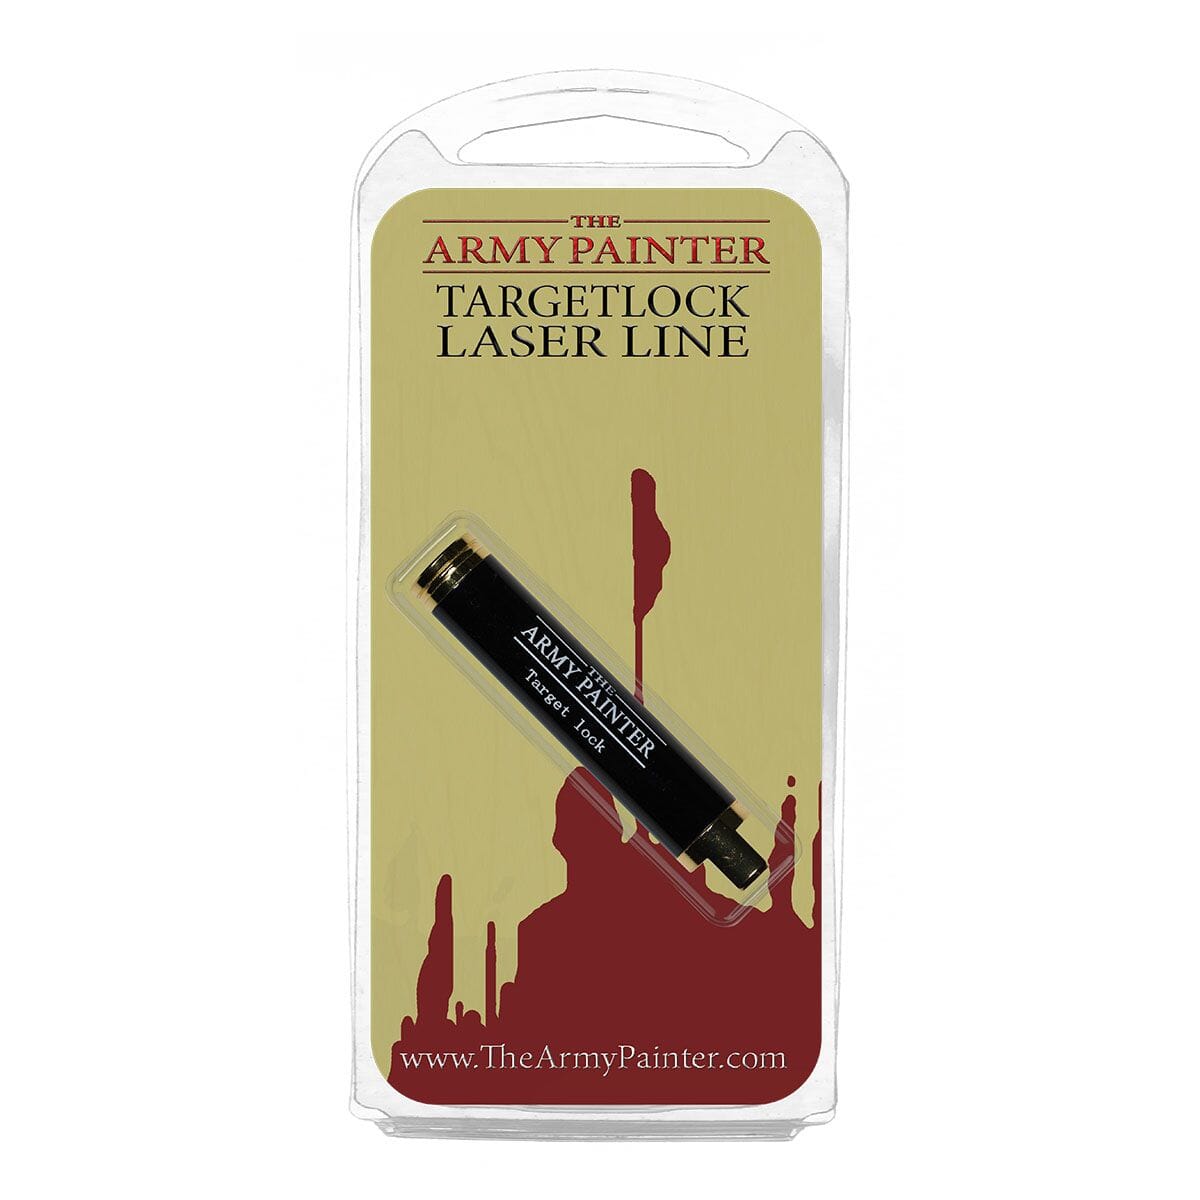 The Army Painter Targetlock Laser Line Supplies The Army Painter 